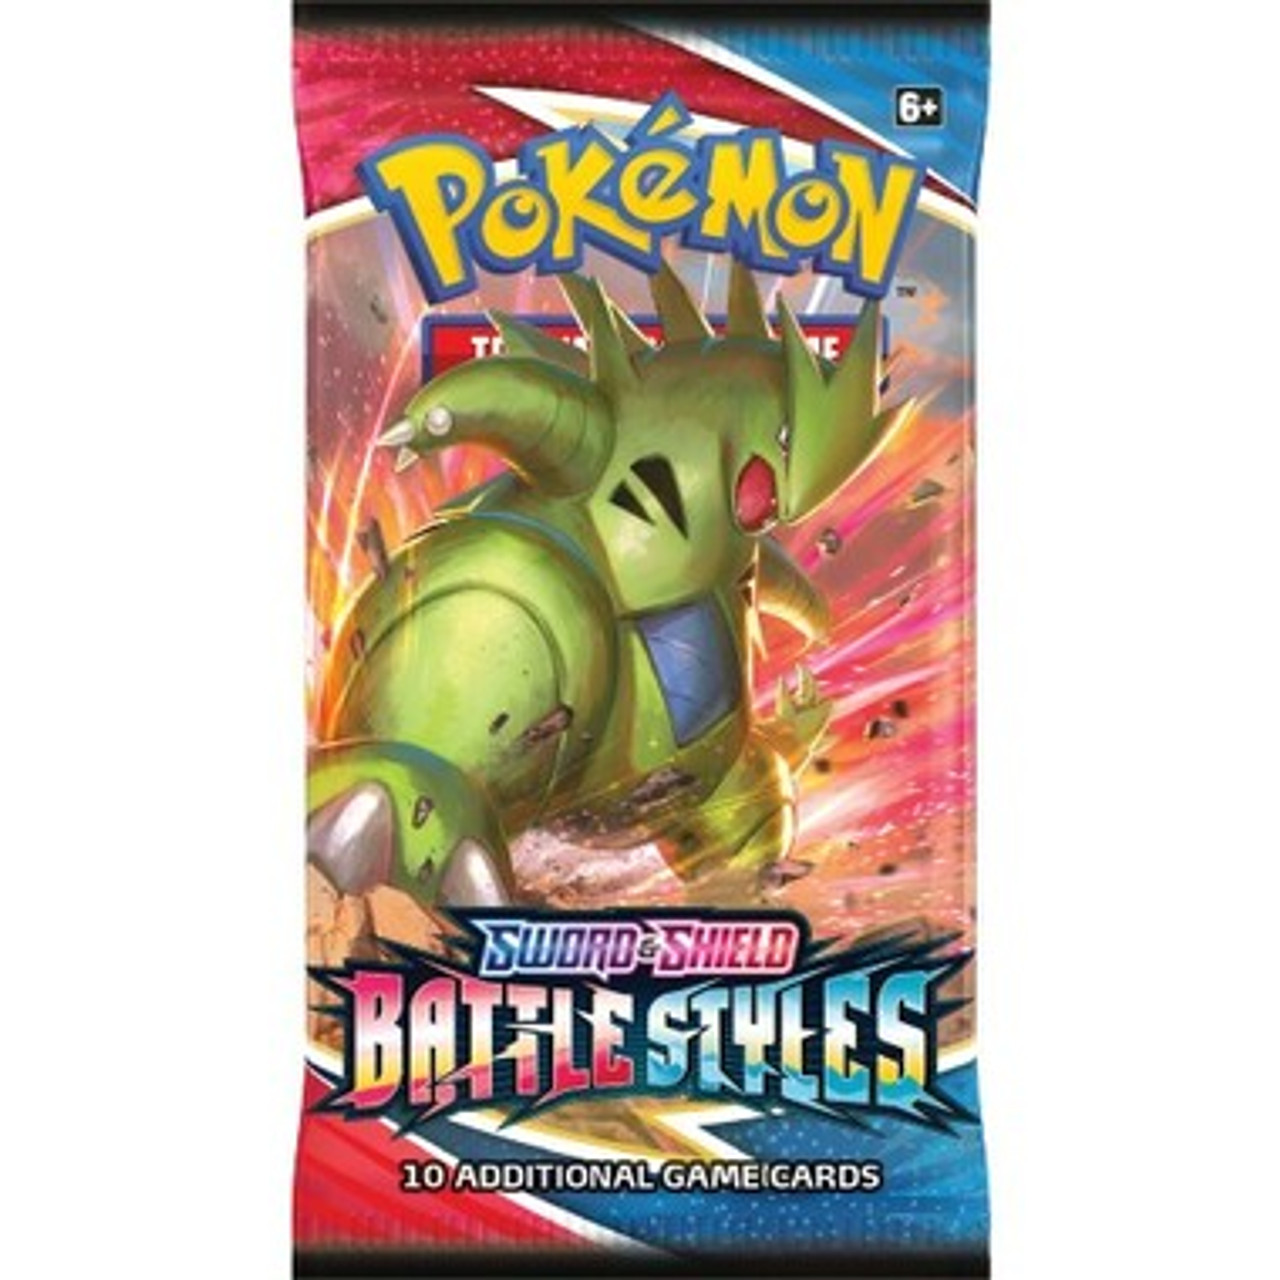 3 Booster Packs Pokemon SWORD AND SHIELD Battle Styles Booster Pack New Sealed 